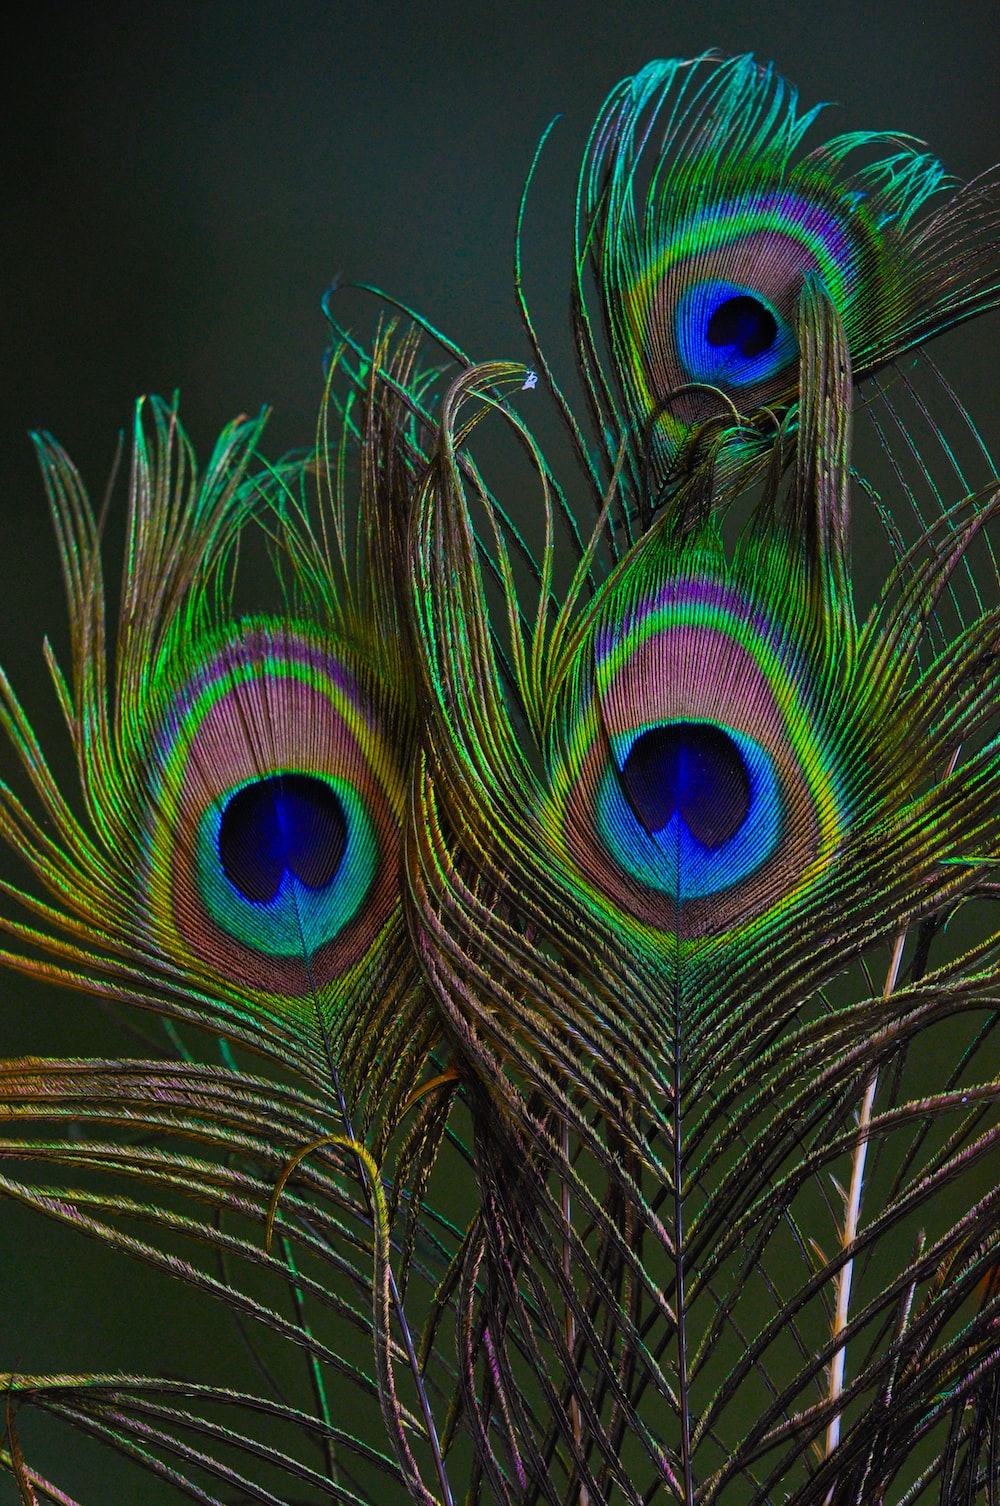 Peacock feathers, a symbol of Good Luck, piume di pavone